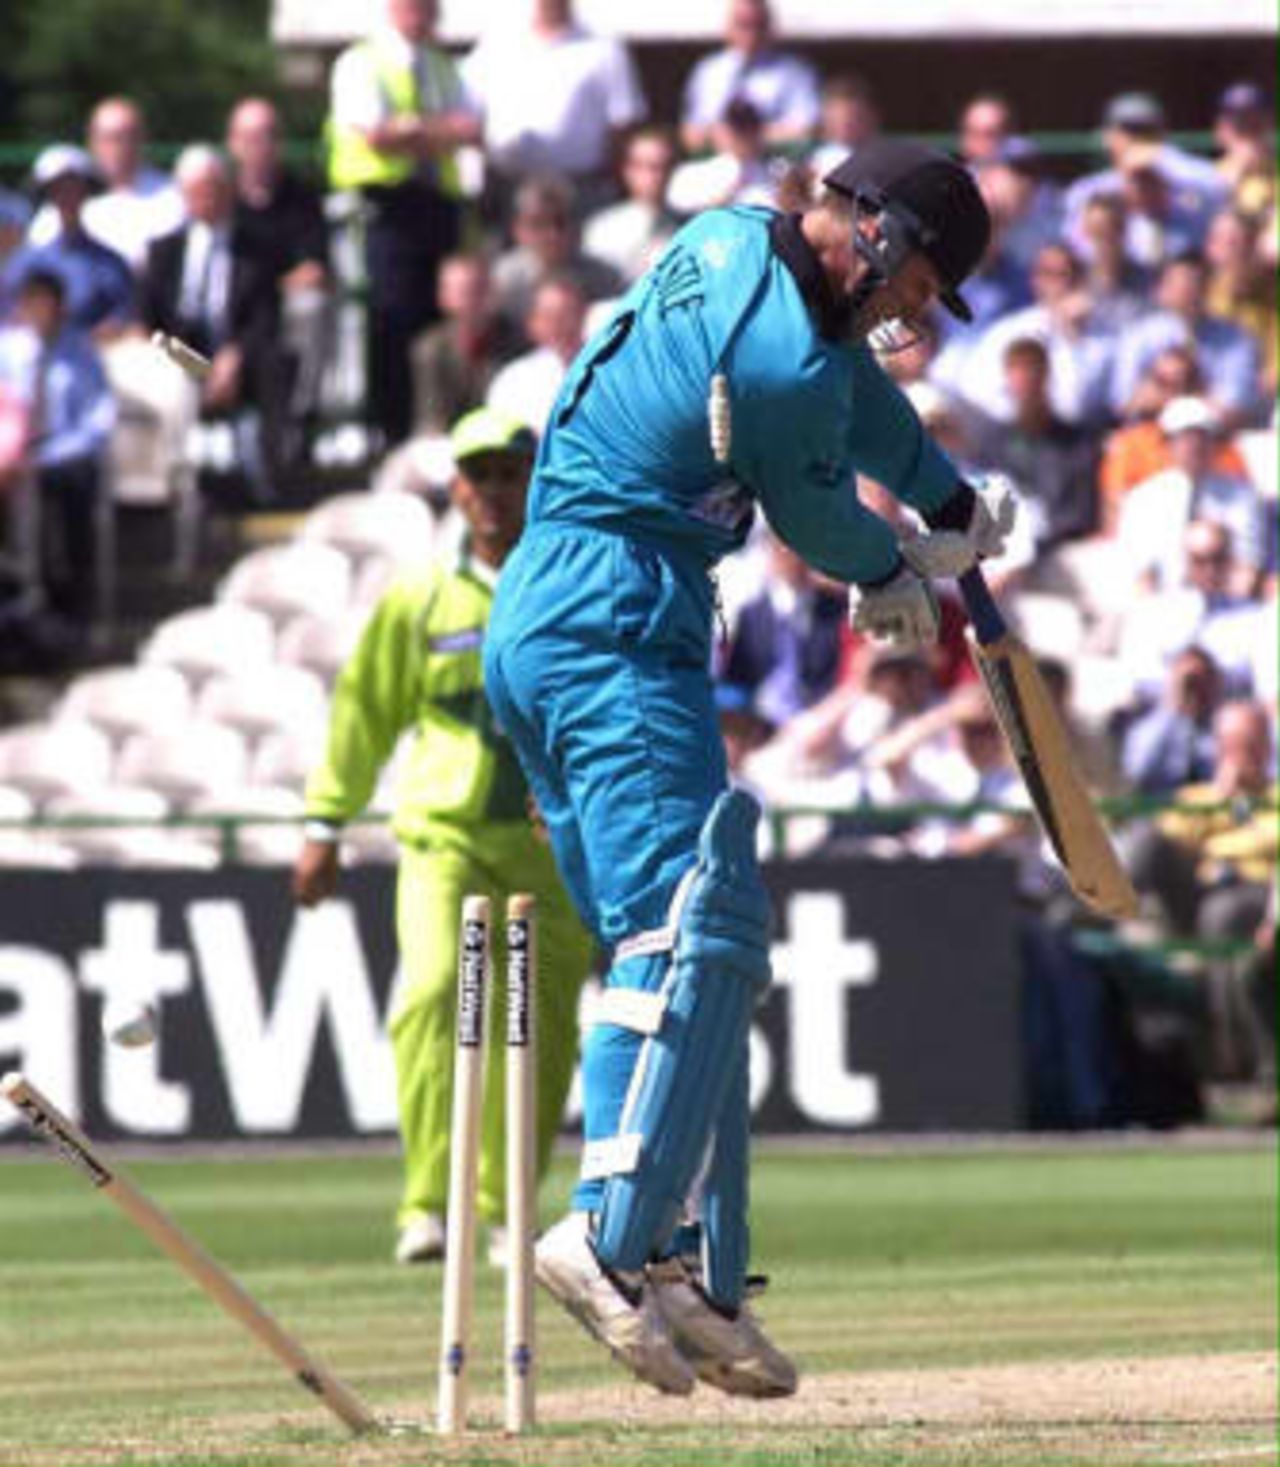 Nathan Astle of New Zealand is clean bowled by Shoaib Akhtar of Pakistan in their Cricket World Cup Semi Final at Old Trafford in Manchester 16 June 1999